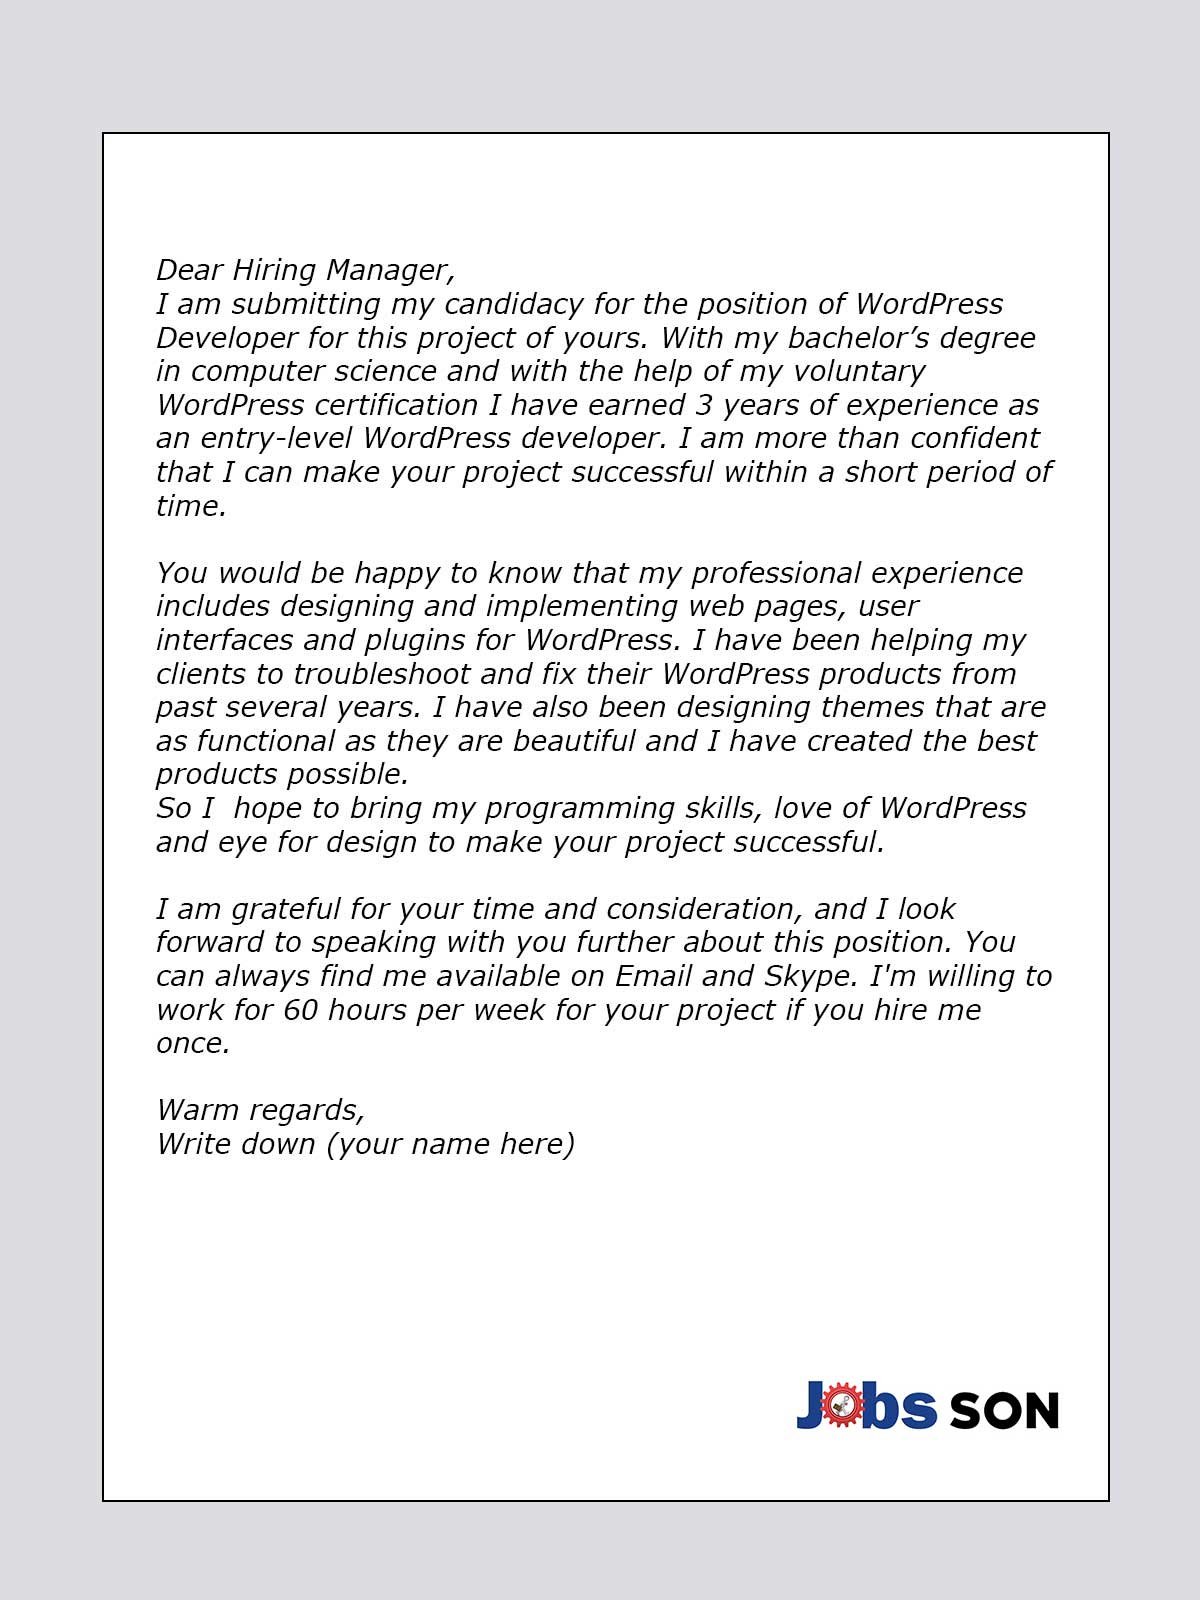 how to write a good cover letter on upwork